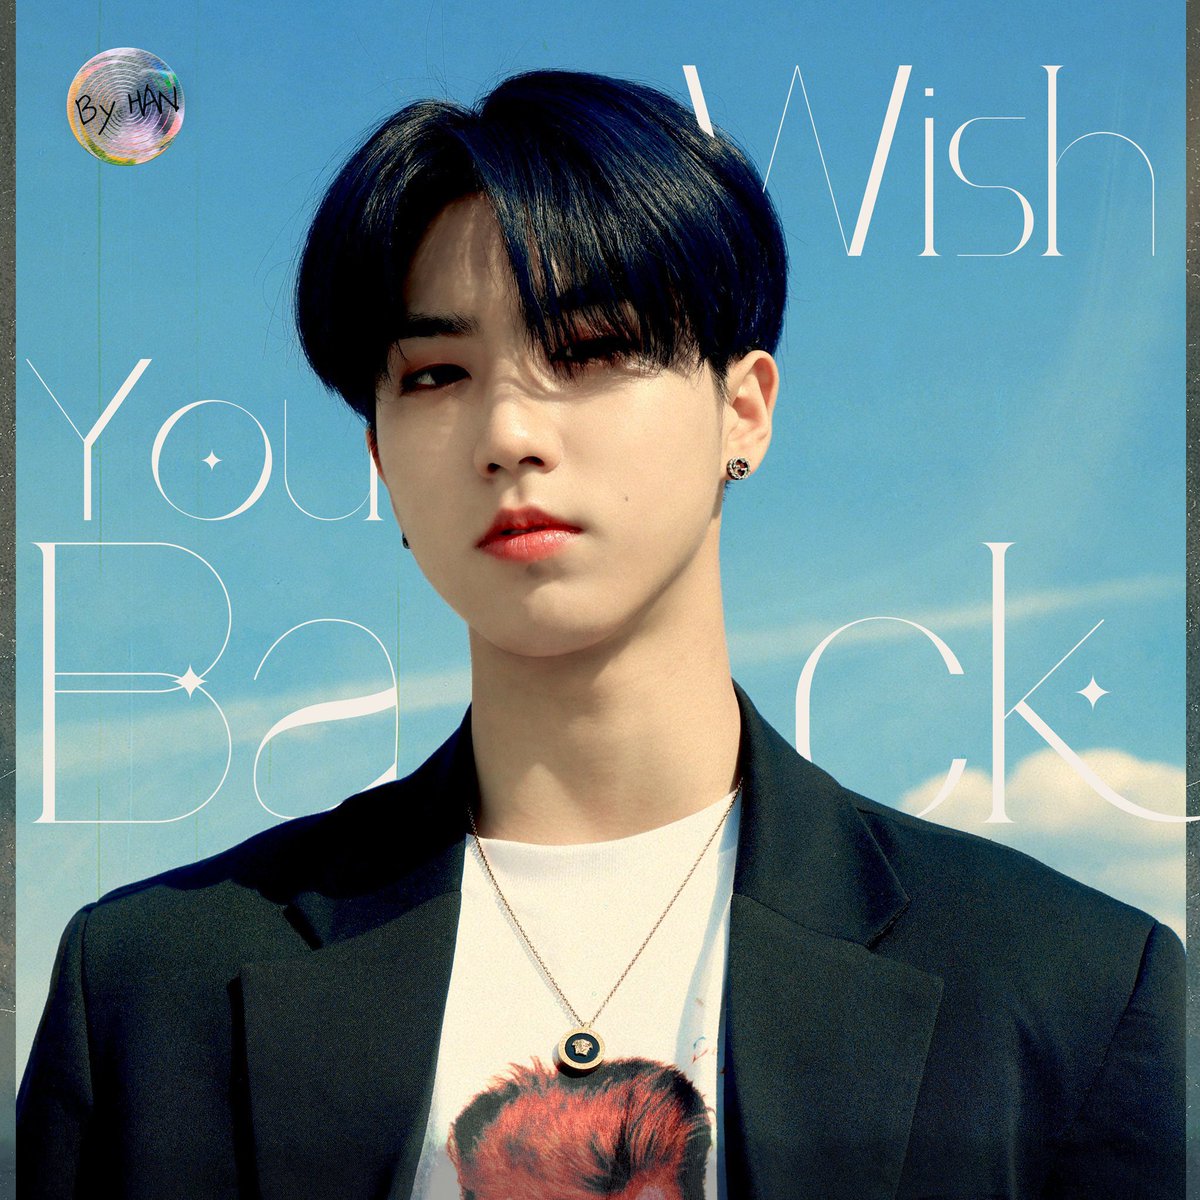 since its 3rd anniversary of wish you back remember when we all assume and thought that wish you back is write by han for hyunjin ikyk…. hoho not me hurt my own heart 🥹😭

Wishing WISH YOU BACK happy anniversary ☁️💙
#WISHYOUBACKturns3
#HAN @Stray_Kids